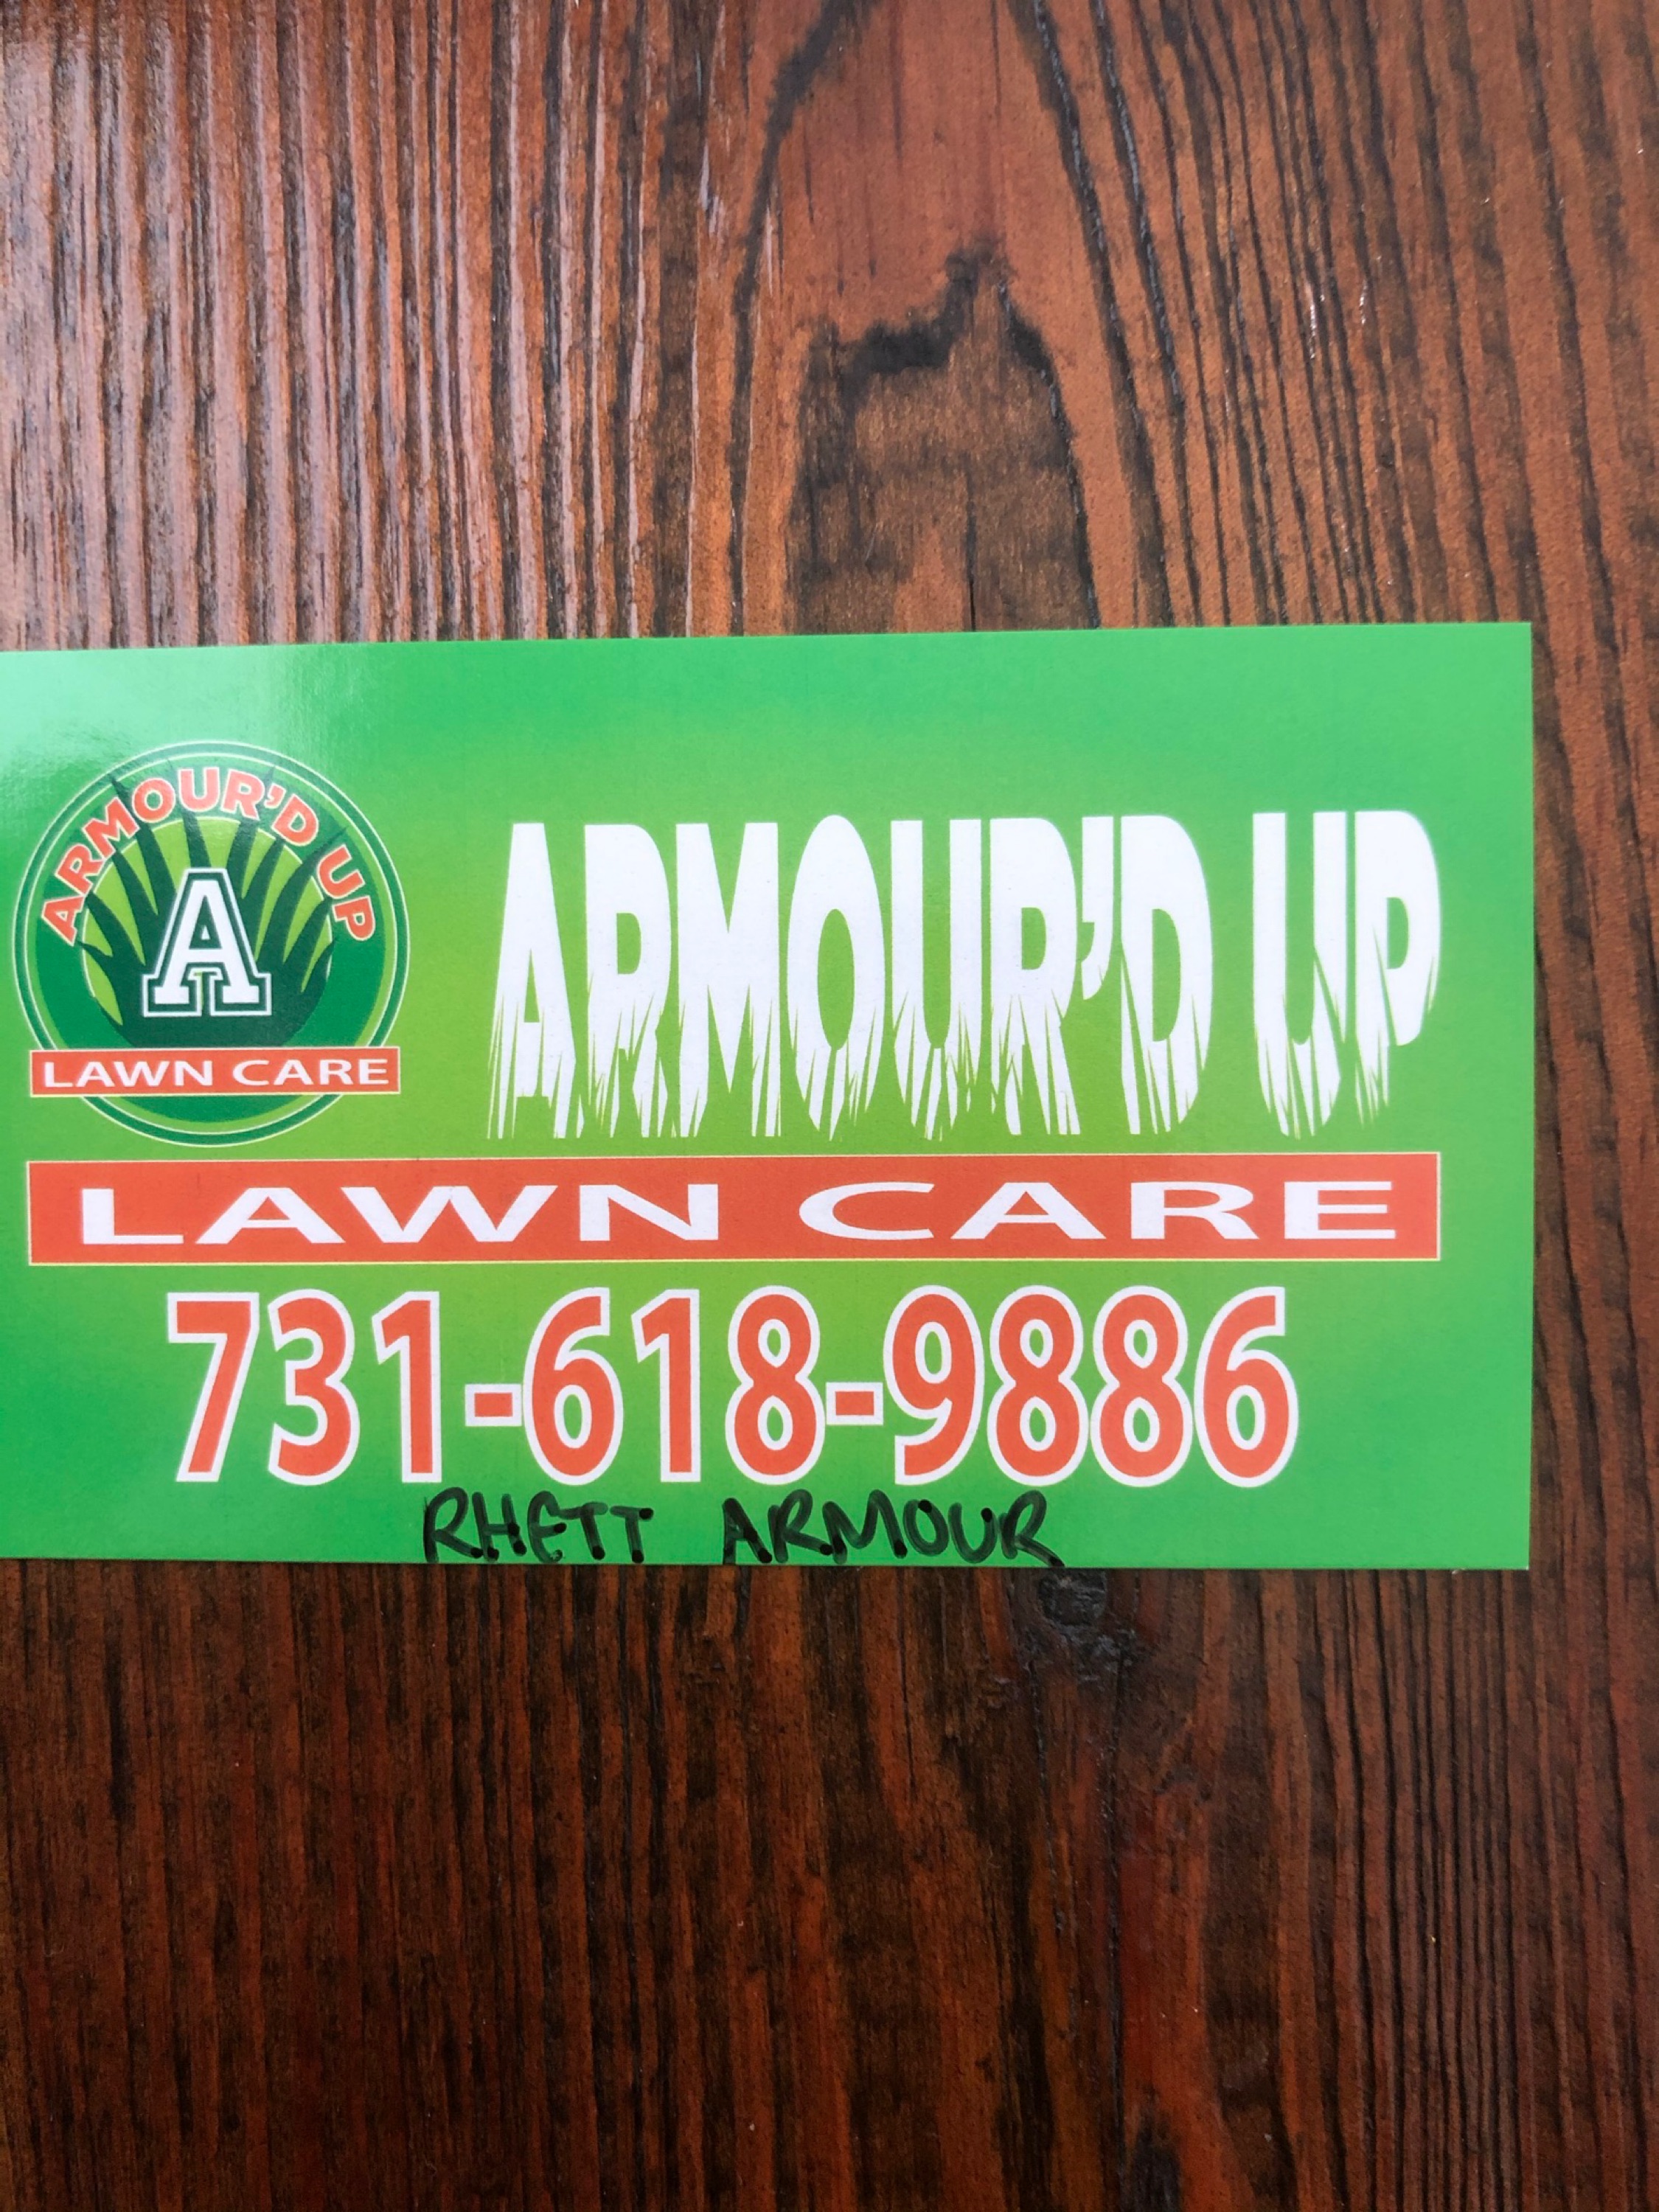 Armour'd Up Lawn Care Logo